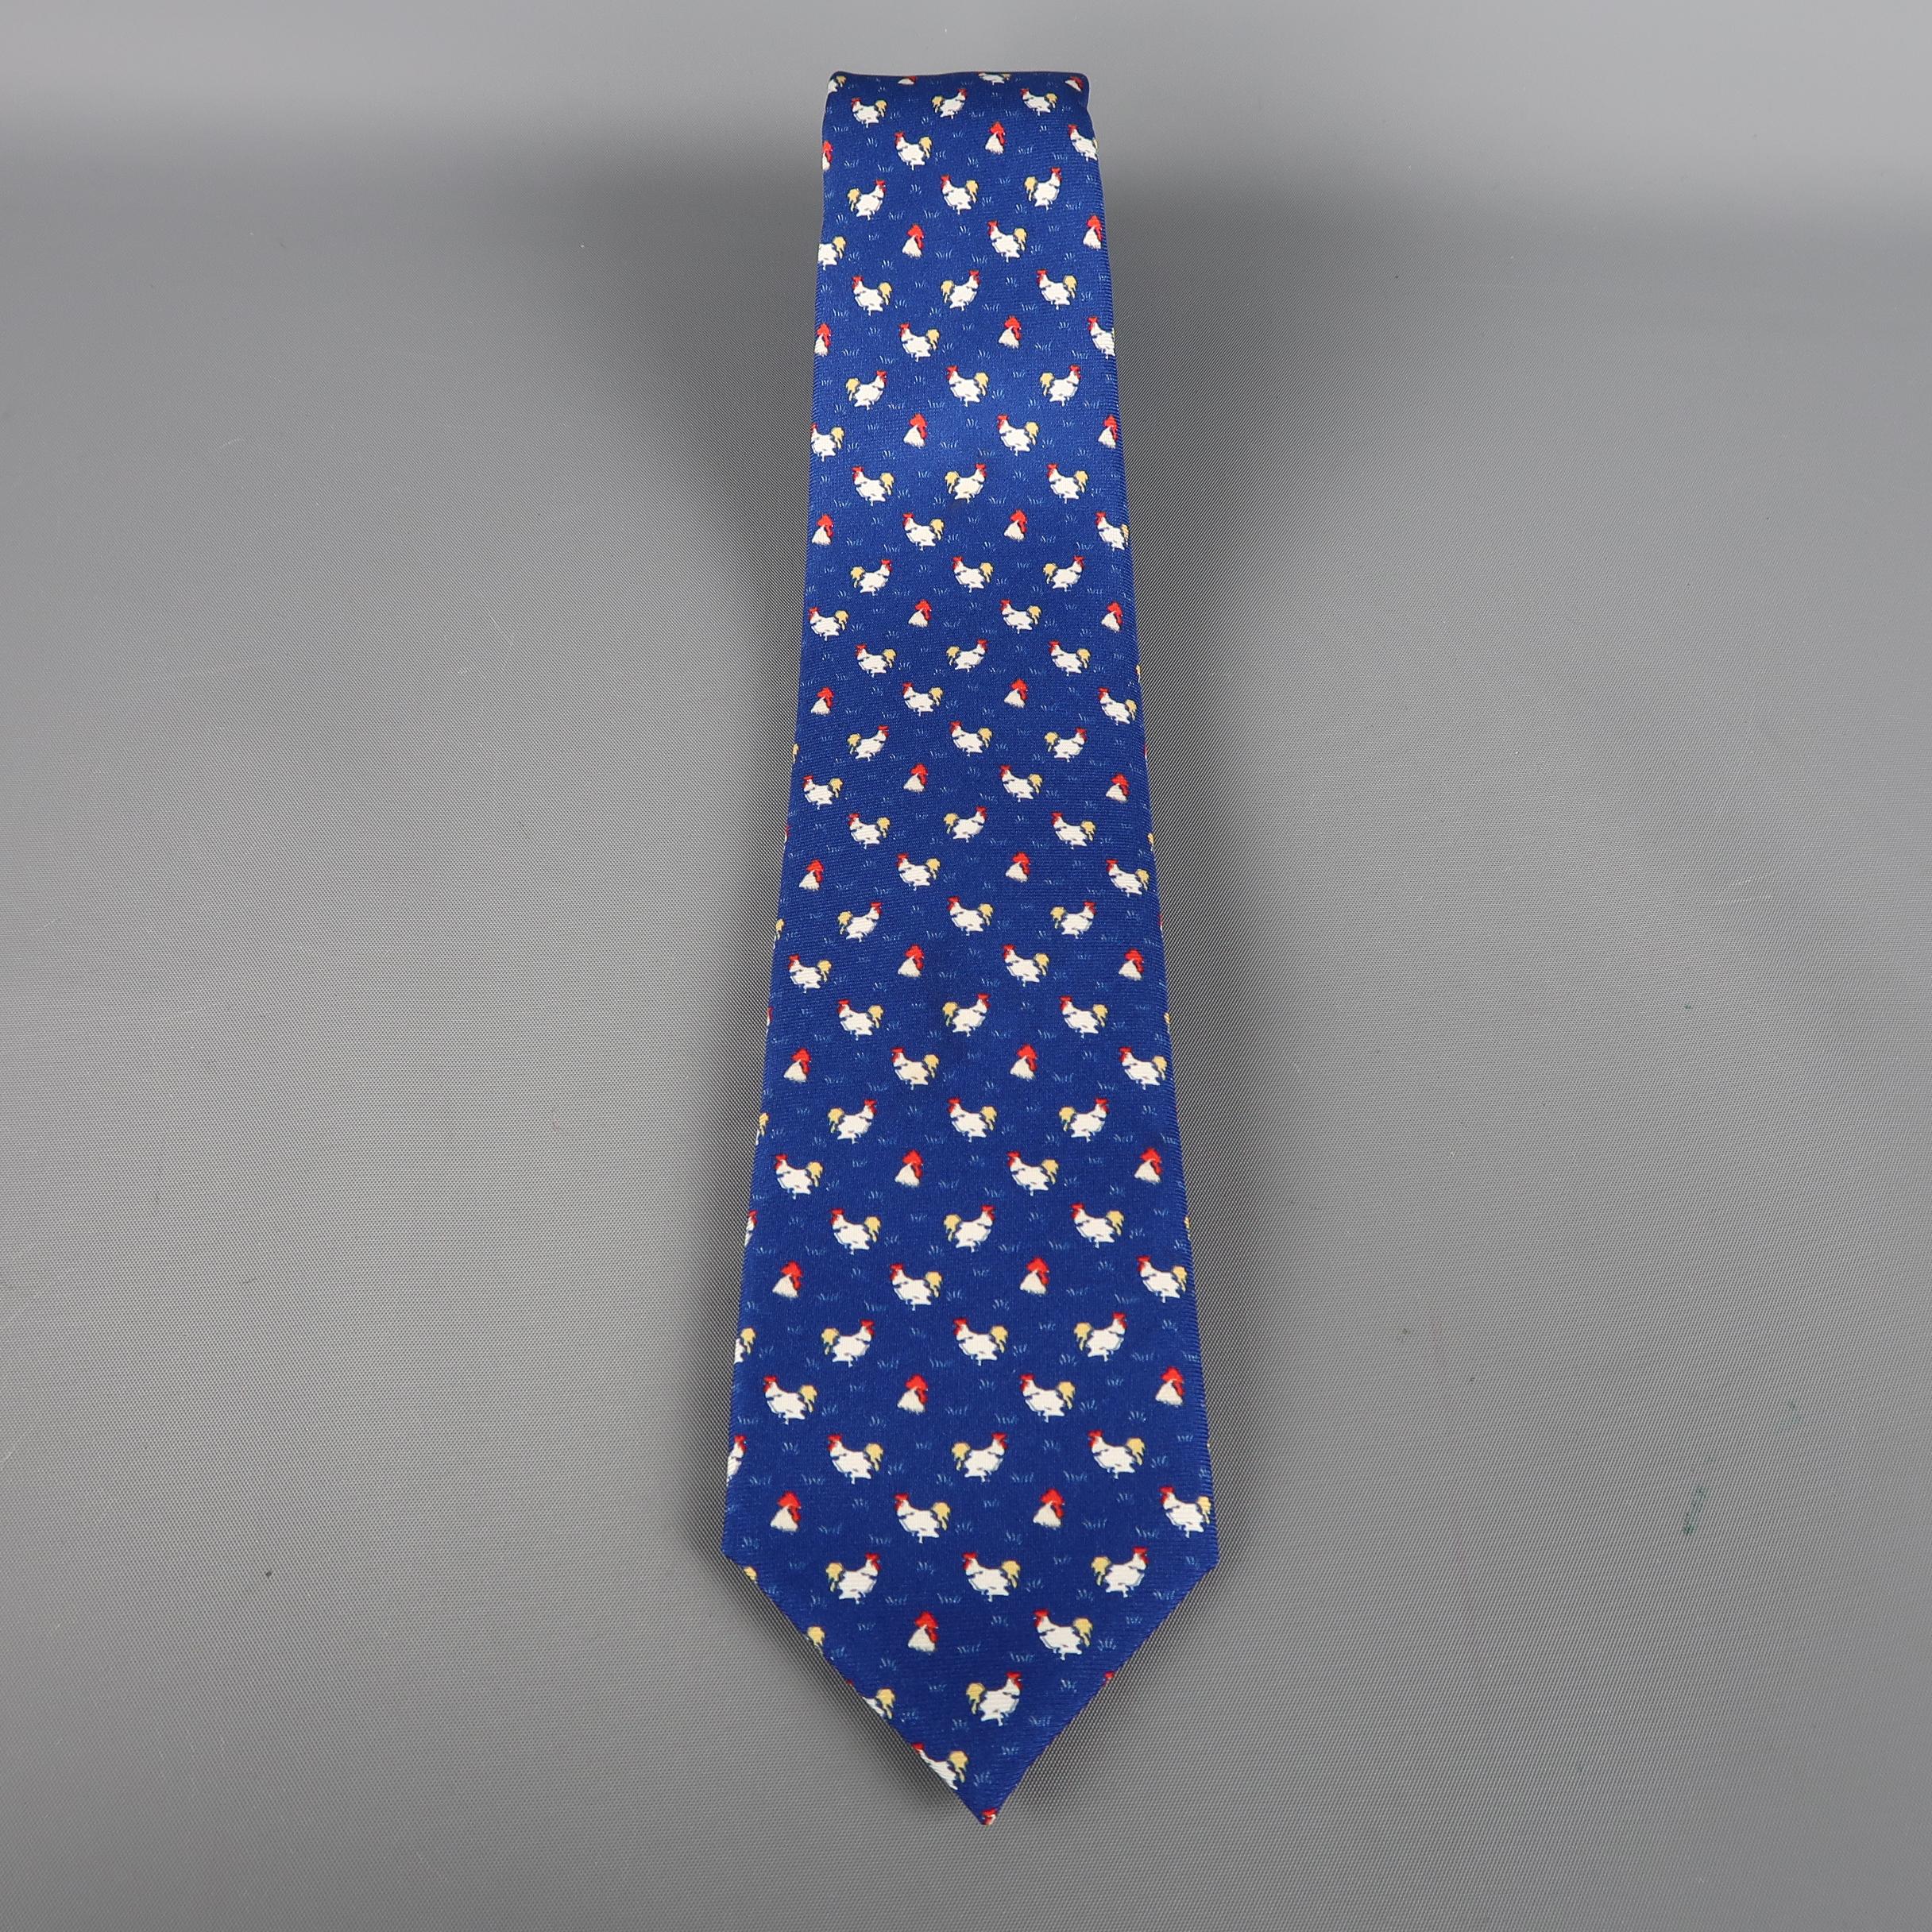 BATTISTONI tie come in navy silk  with an all over rooster print. Made in Italy.
Excellent Pre-Owned Condition.
Width: 3 in.